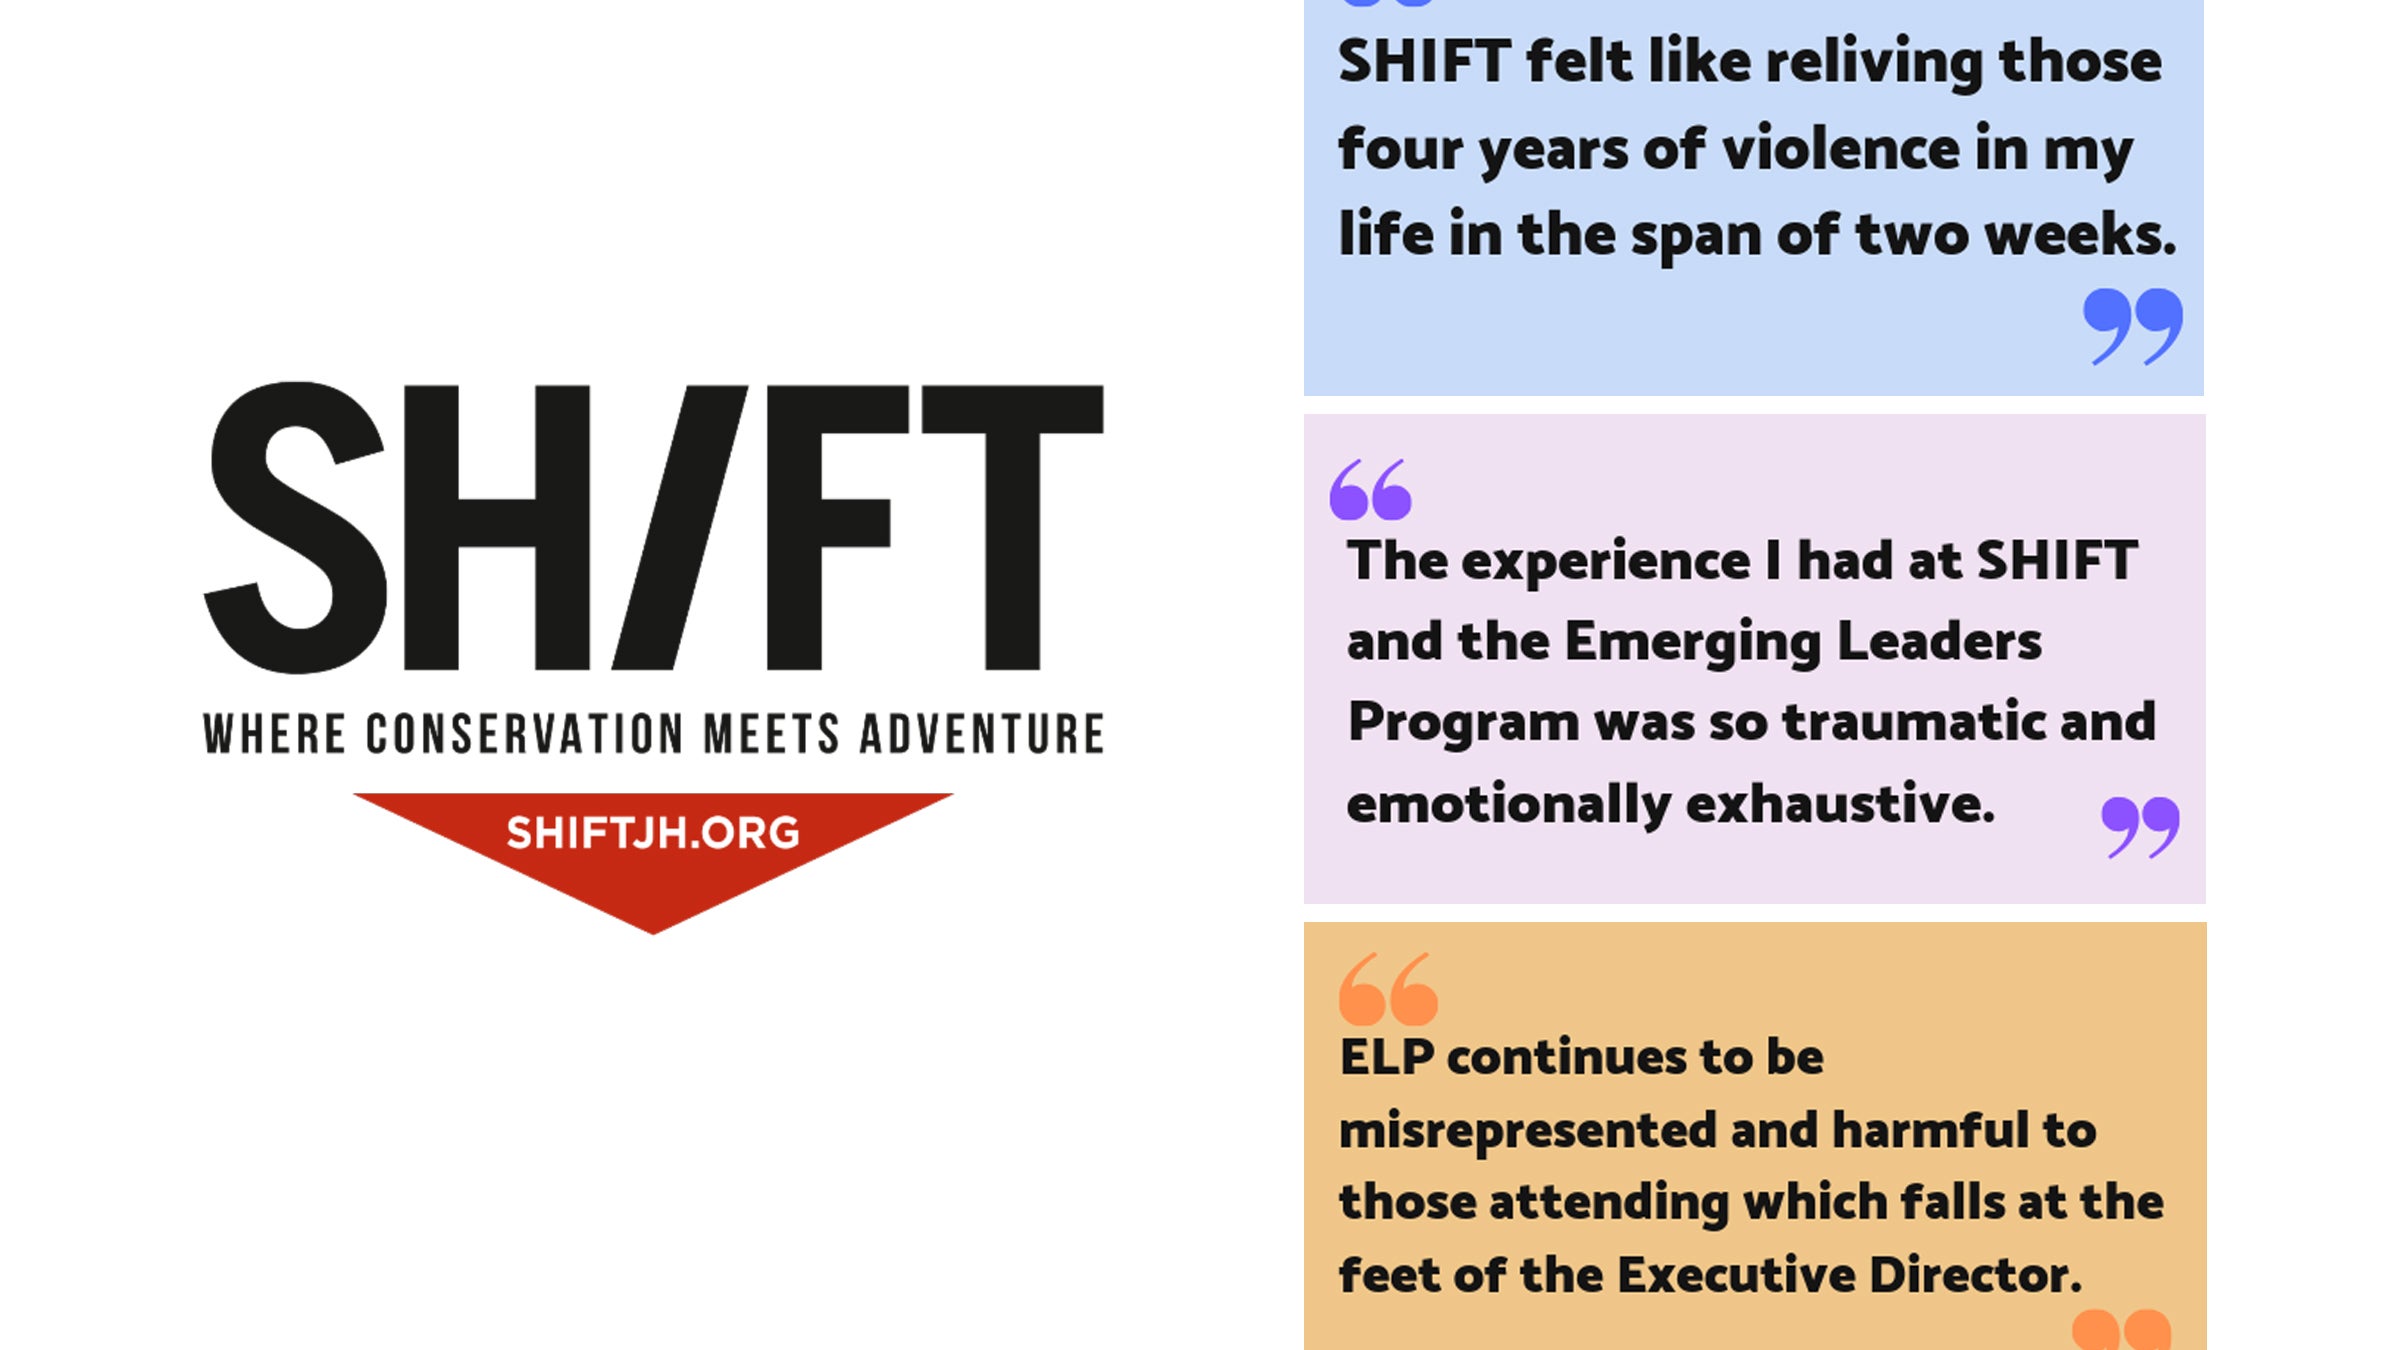 What Happened at the SHIFT Festival?